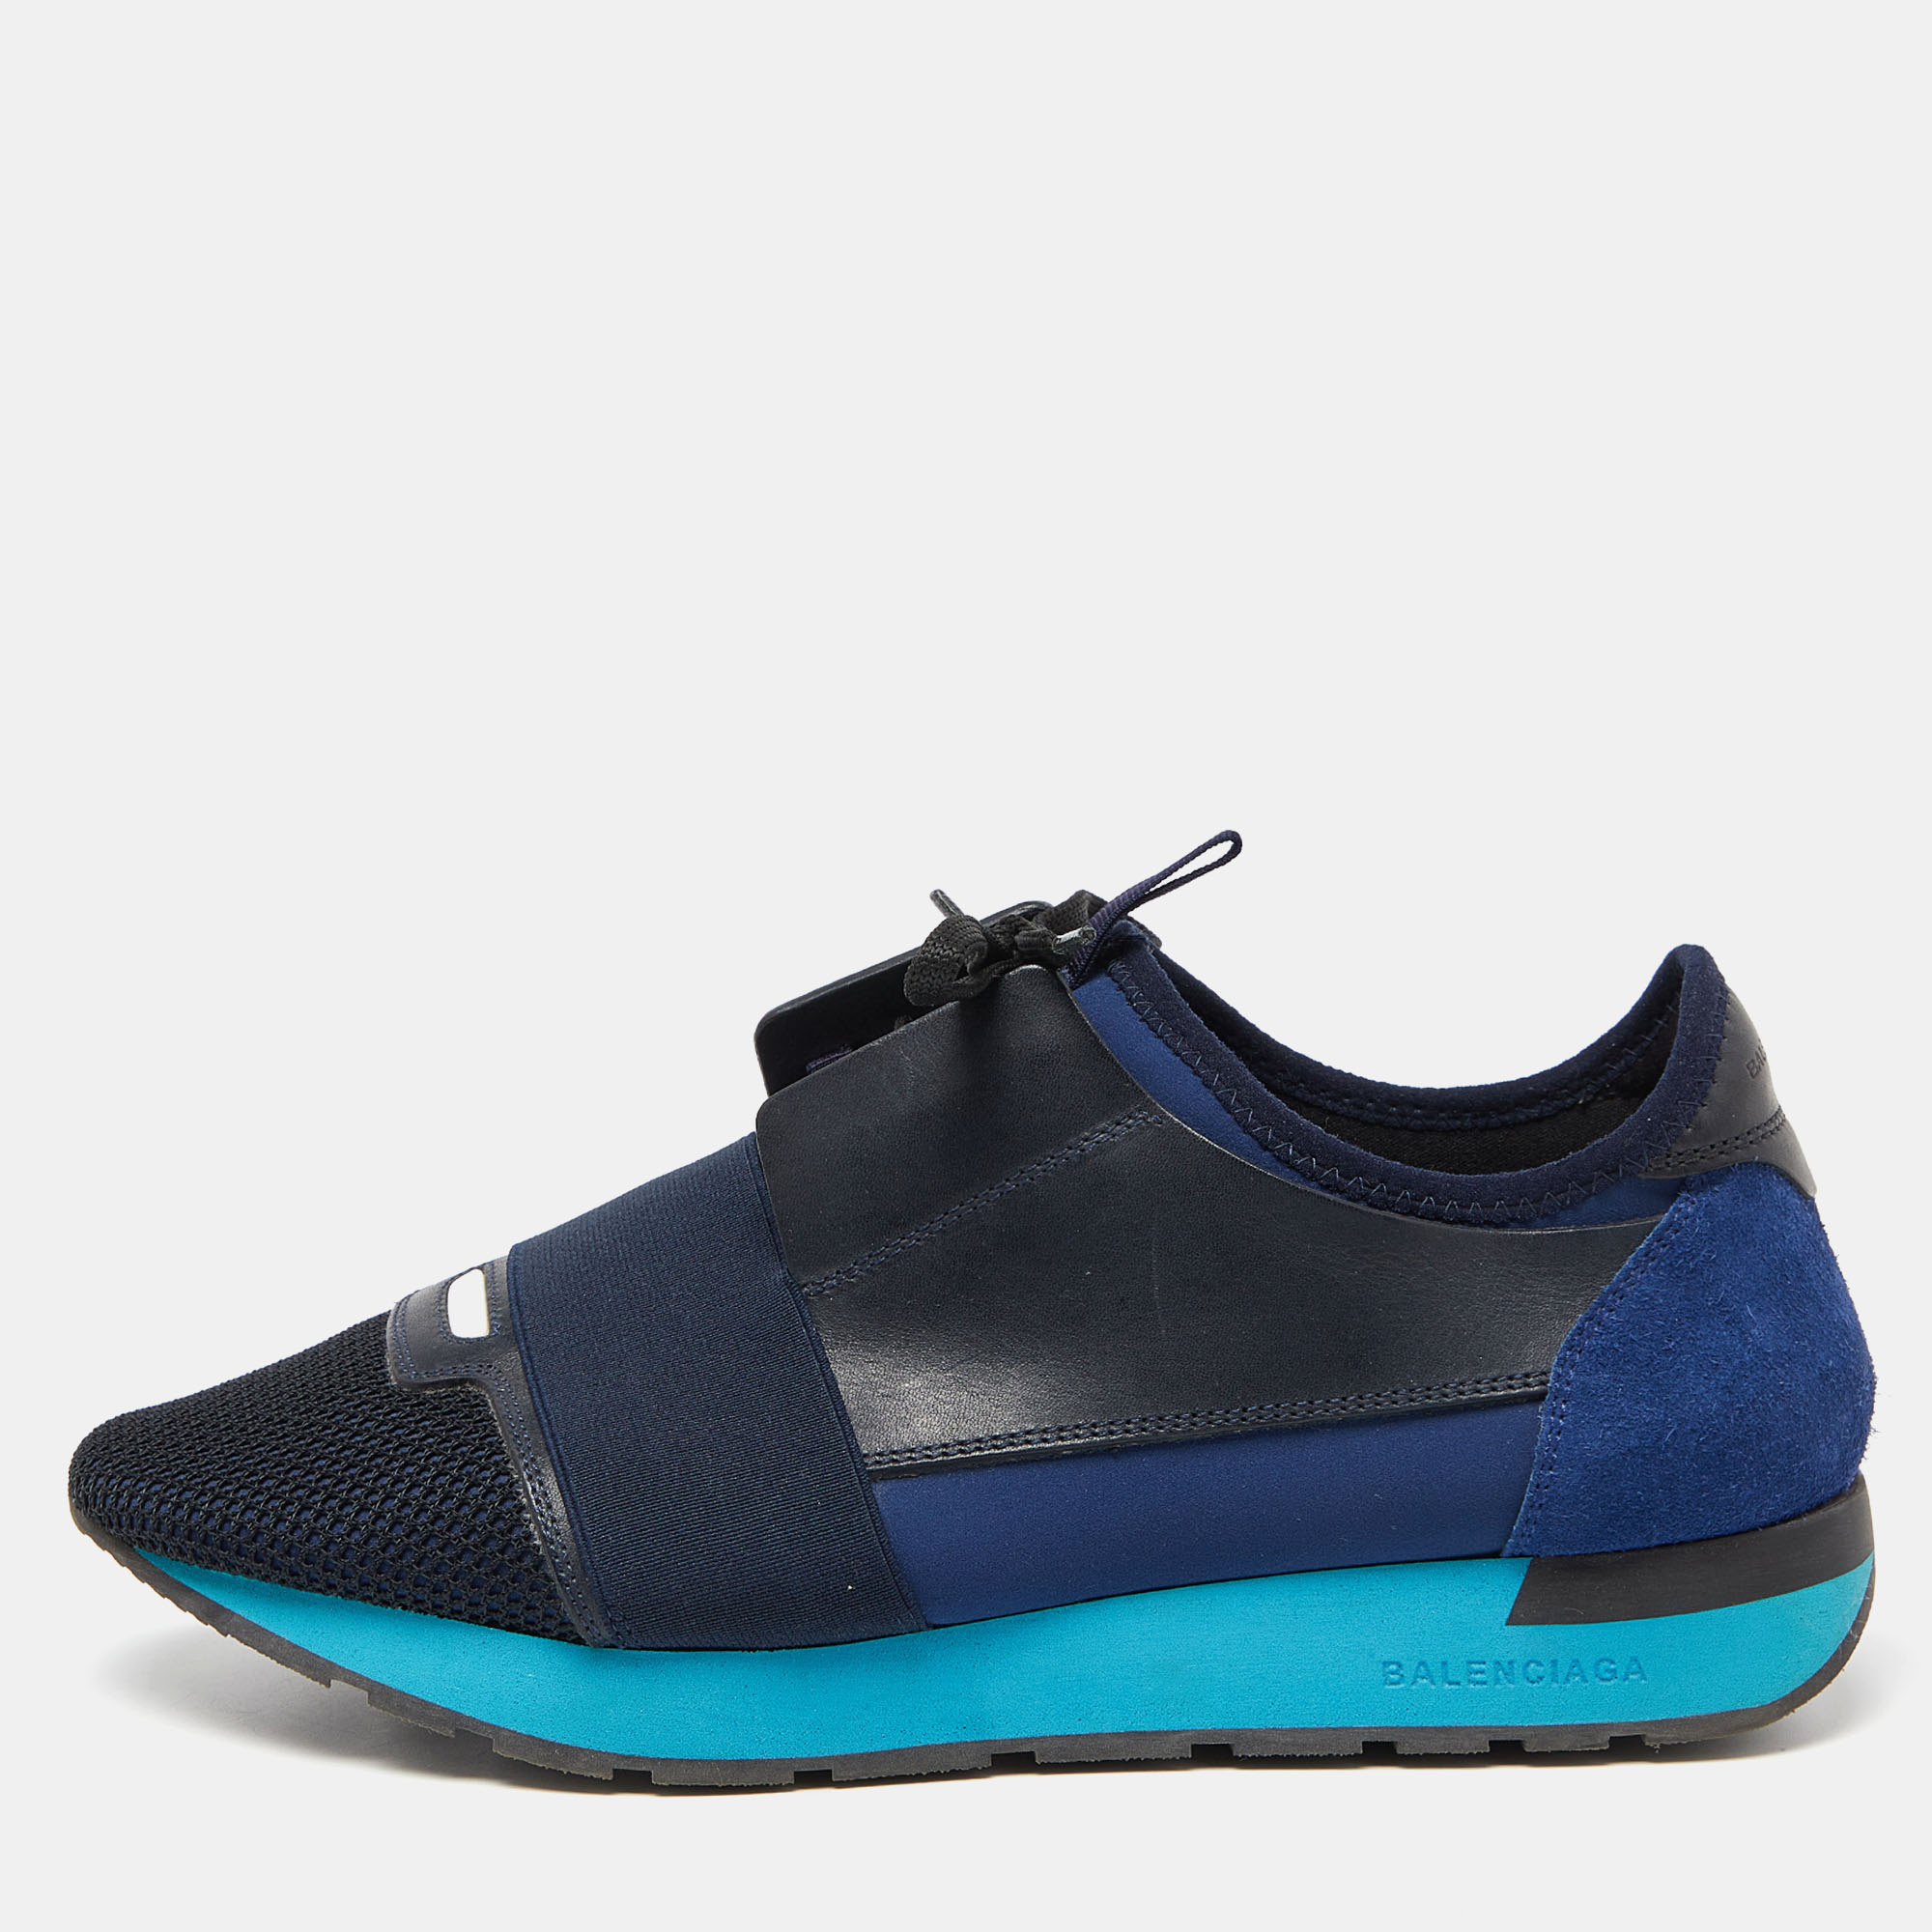 Balenciaga Blue/Black Leather,Suede And Mesh Race Runner Low Top Sneakers Size 41